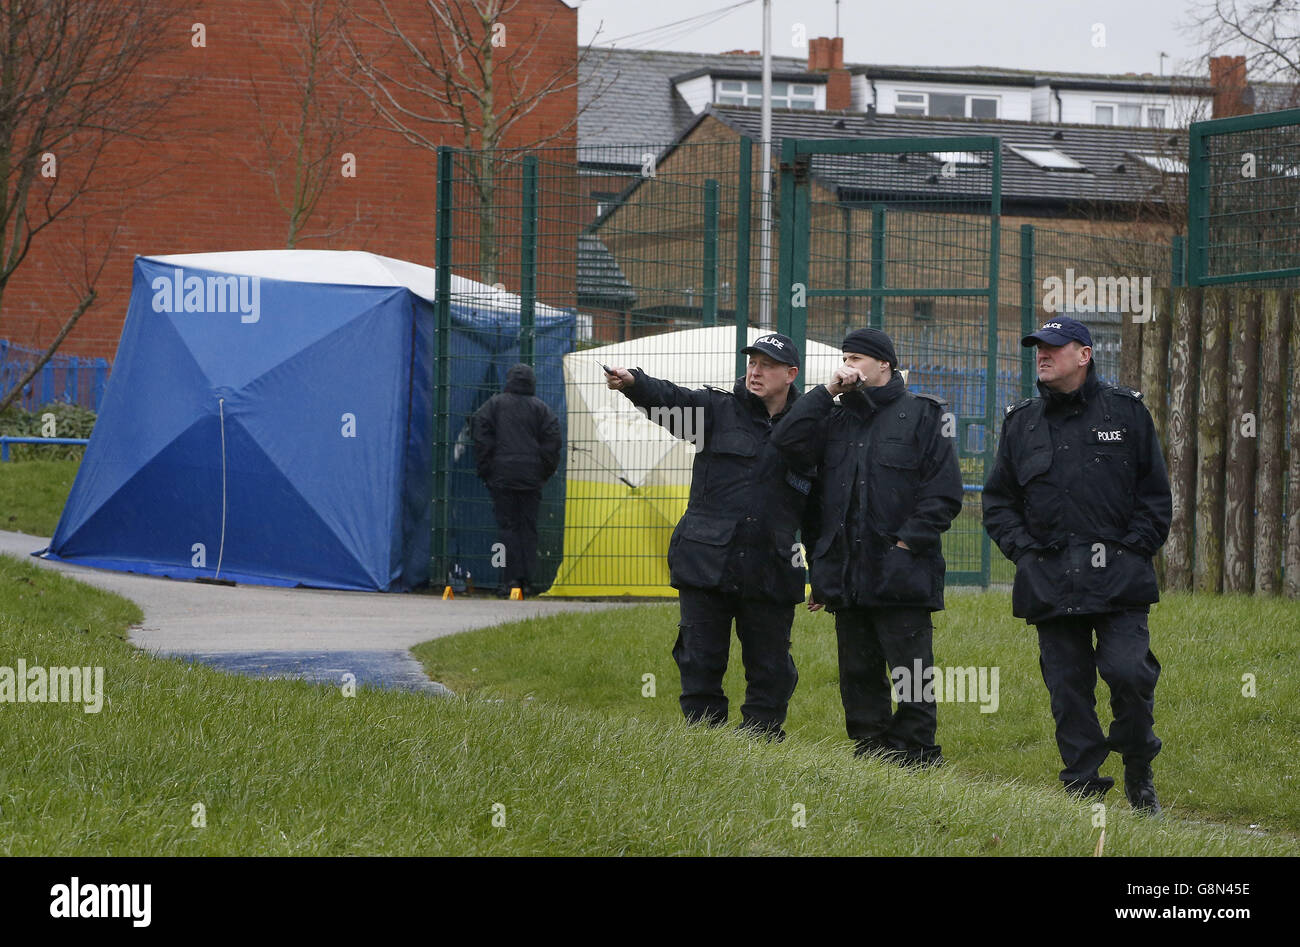 Police at a childrens play area in Rochdale where Jalal Uddin, 64, has died after being found with serious head injuries while on his way home from evening prayers. Stock Photo